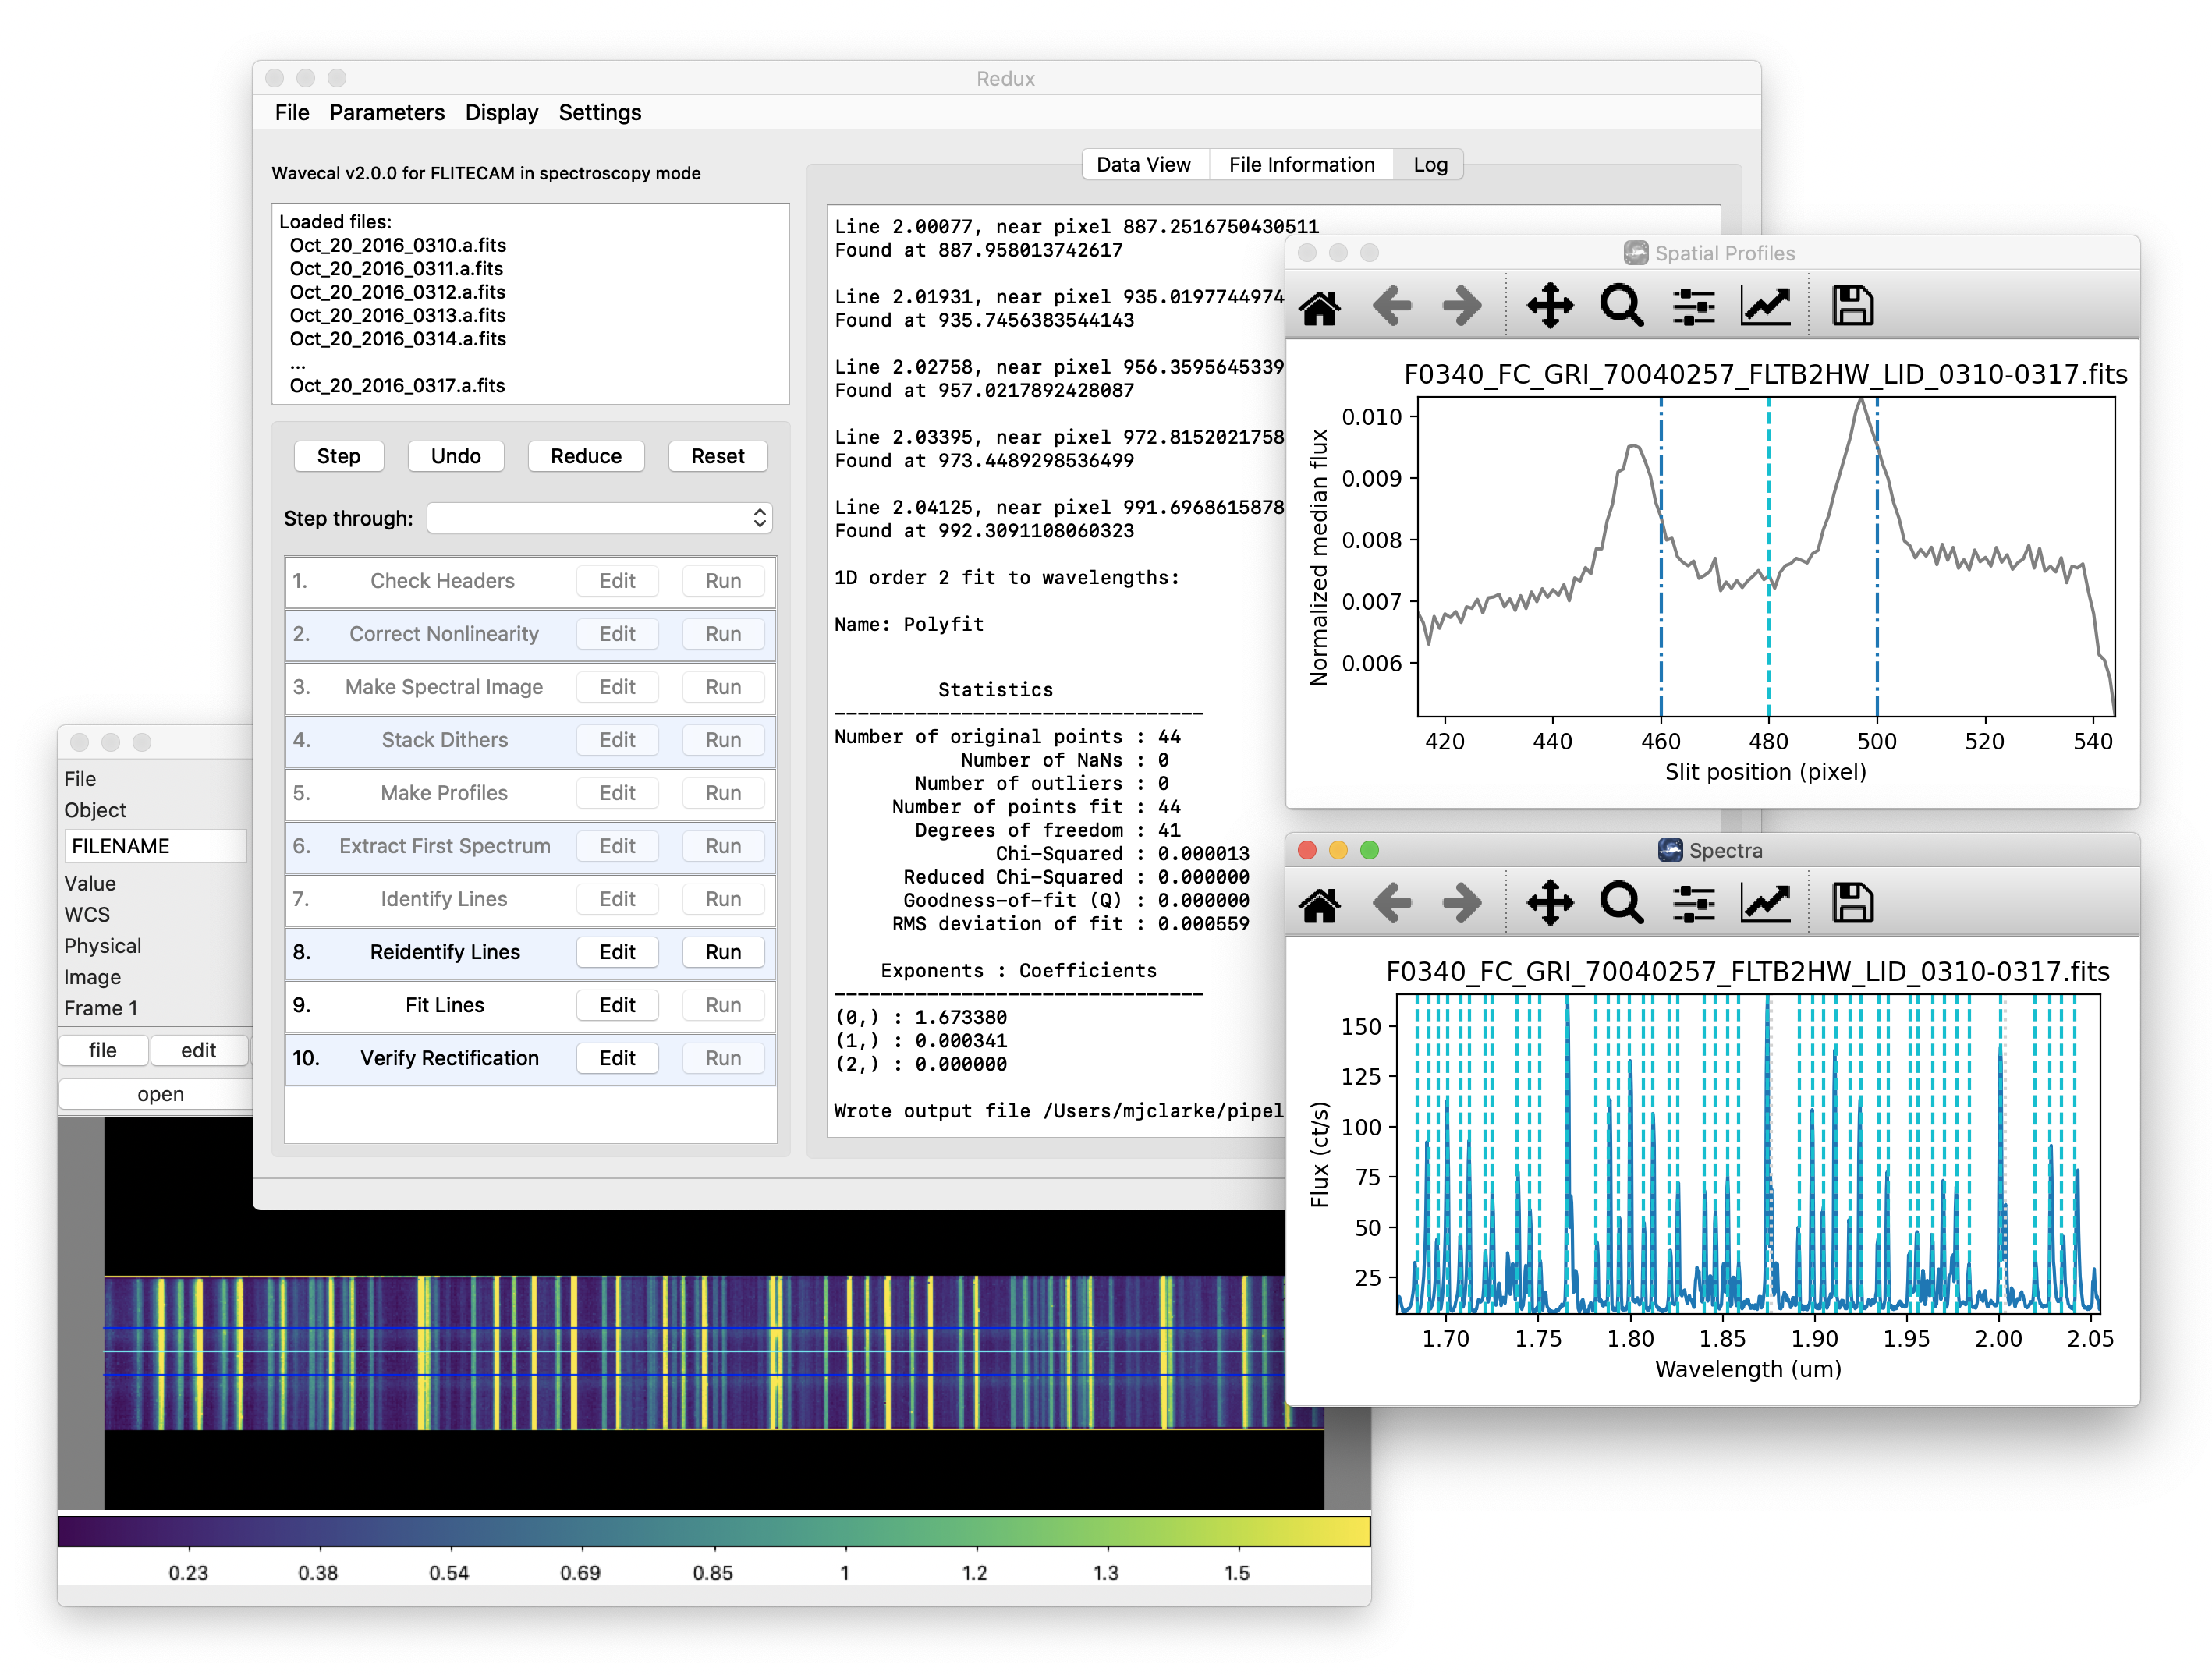 The Redux GUI window, several spectral plot displays with lines marked, and a DS9 window showing a spectral image.